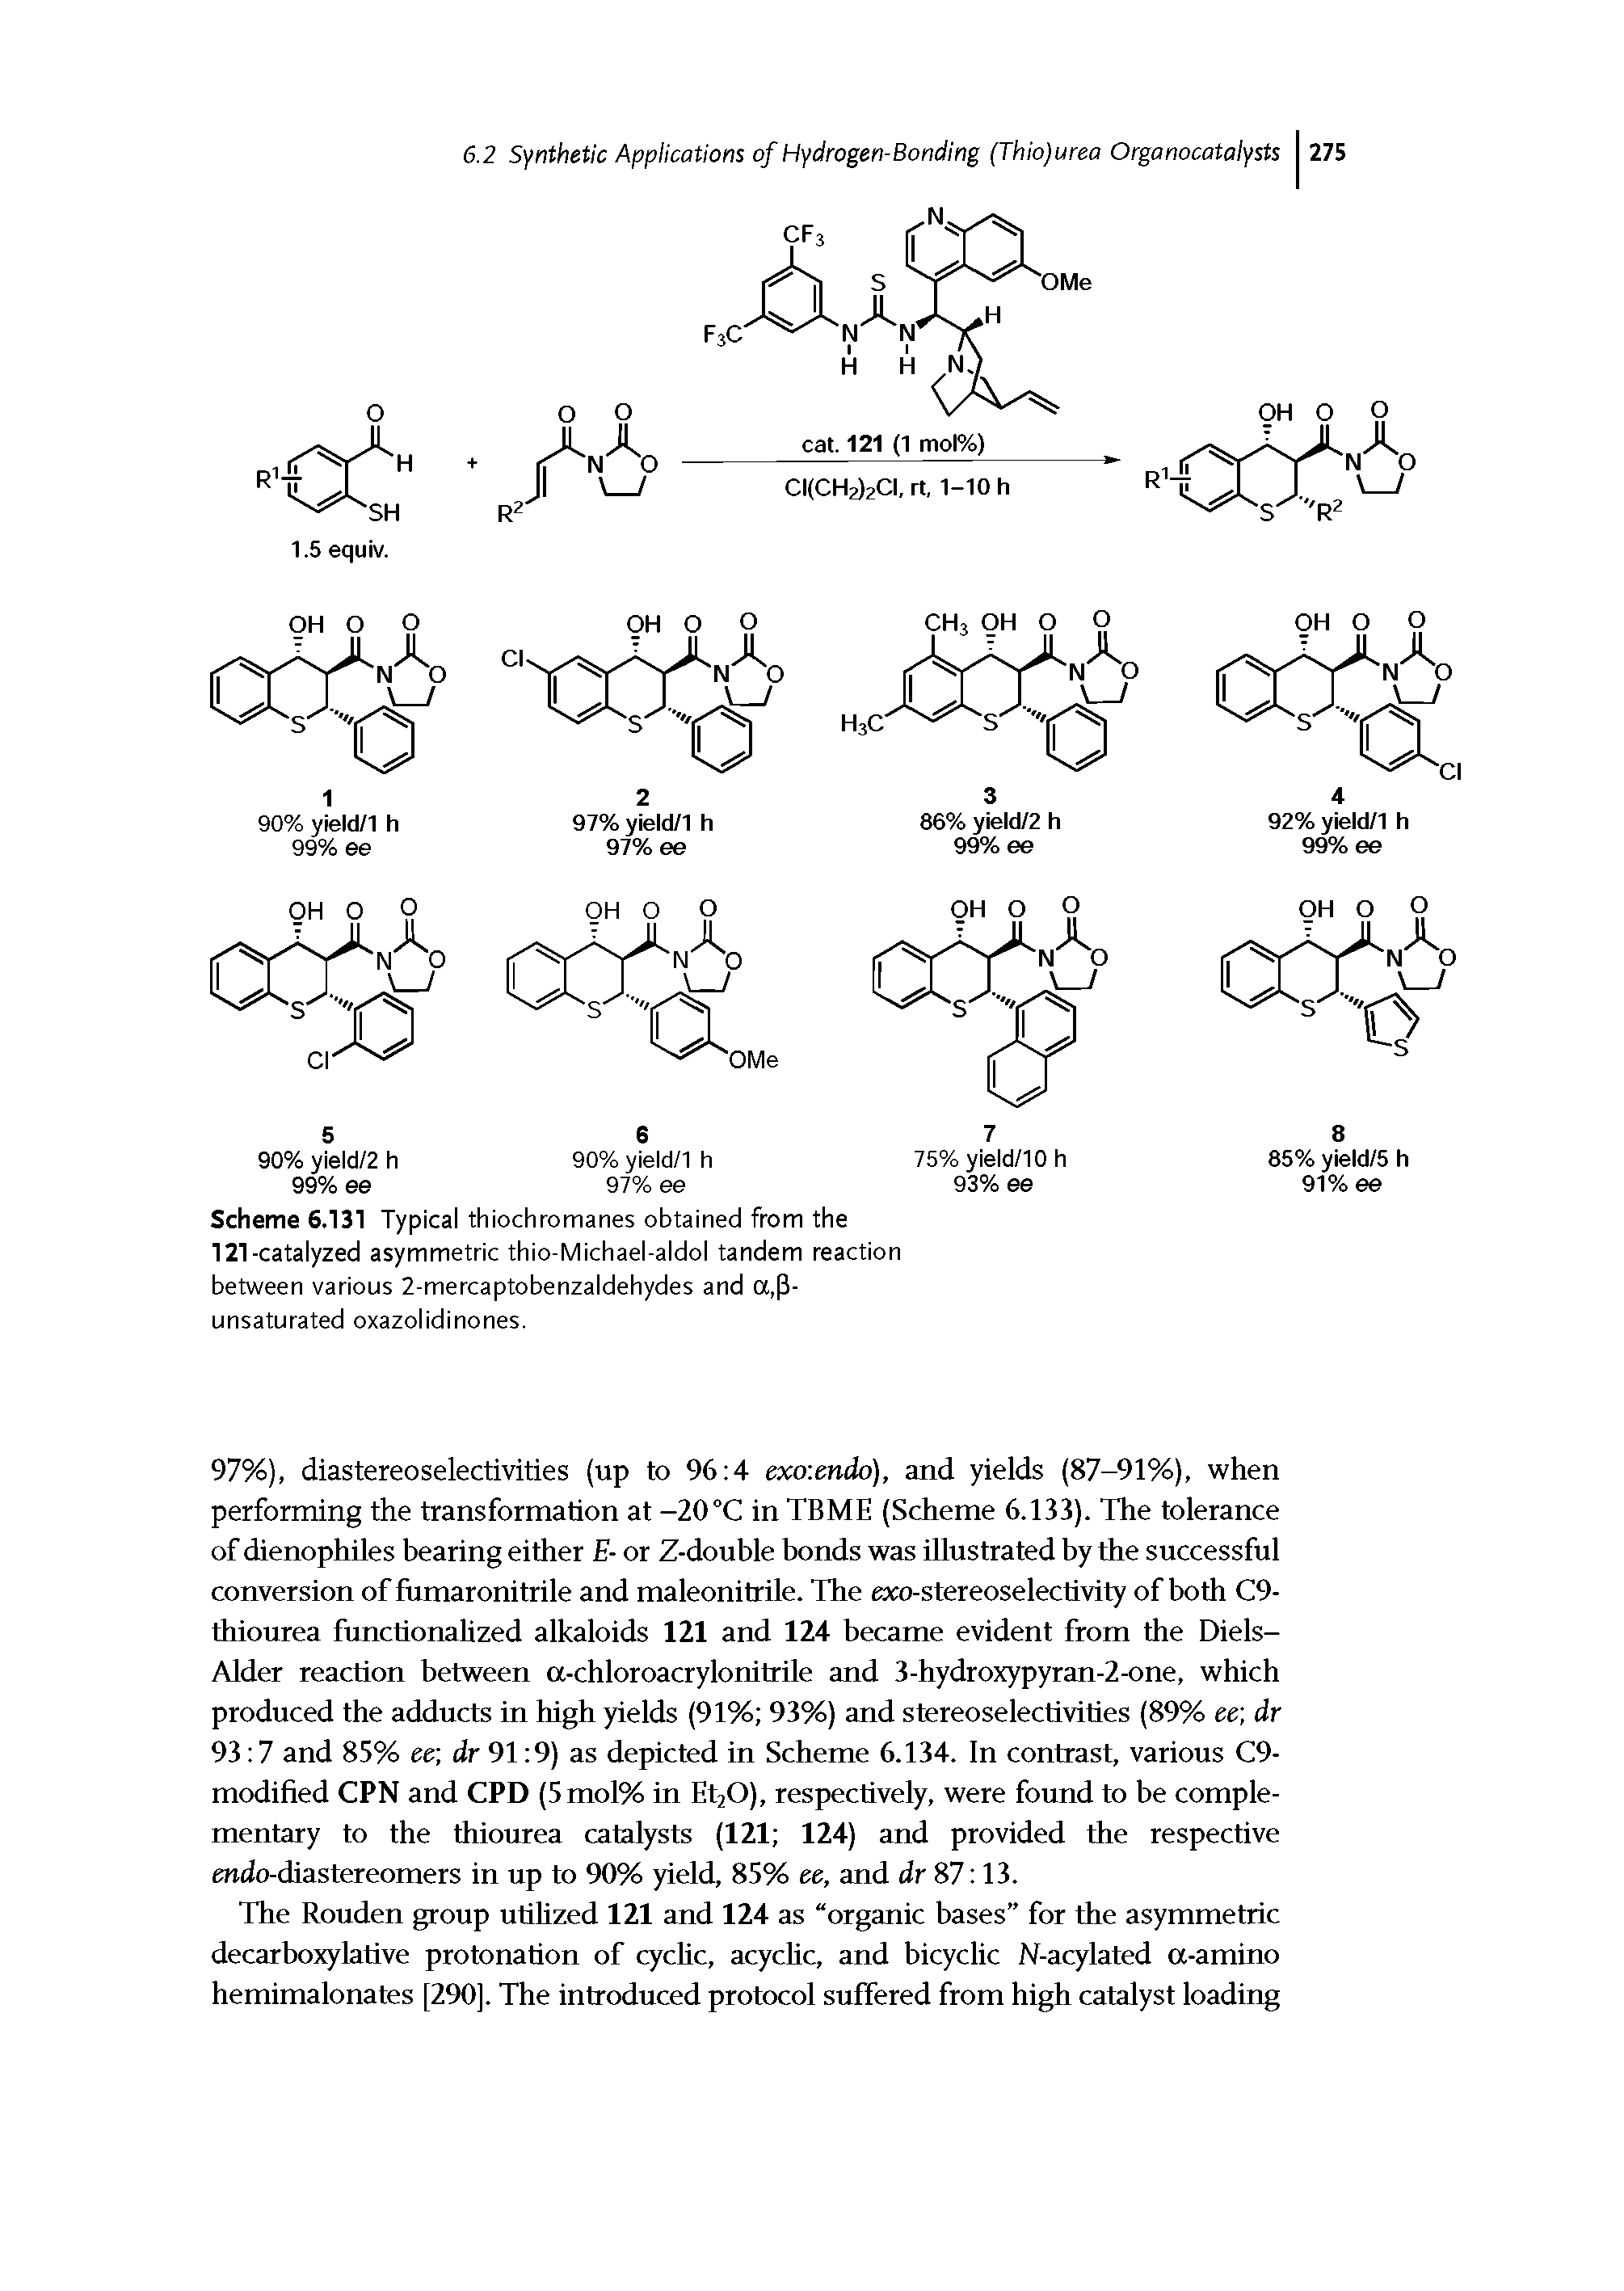 Scheme 6.131 Typical thiochromanes obtained from the 121-catalyzed asymmetric thio-Michael-aldol tandem reaction between various 2-mercaptobenzaldehydes and a, 3-unsaturated oxazolidinones.